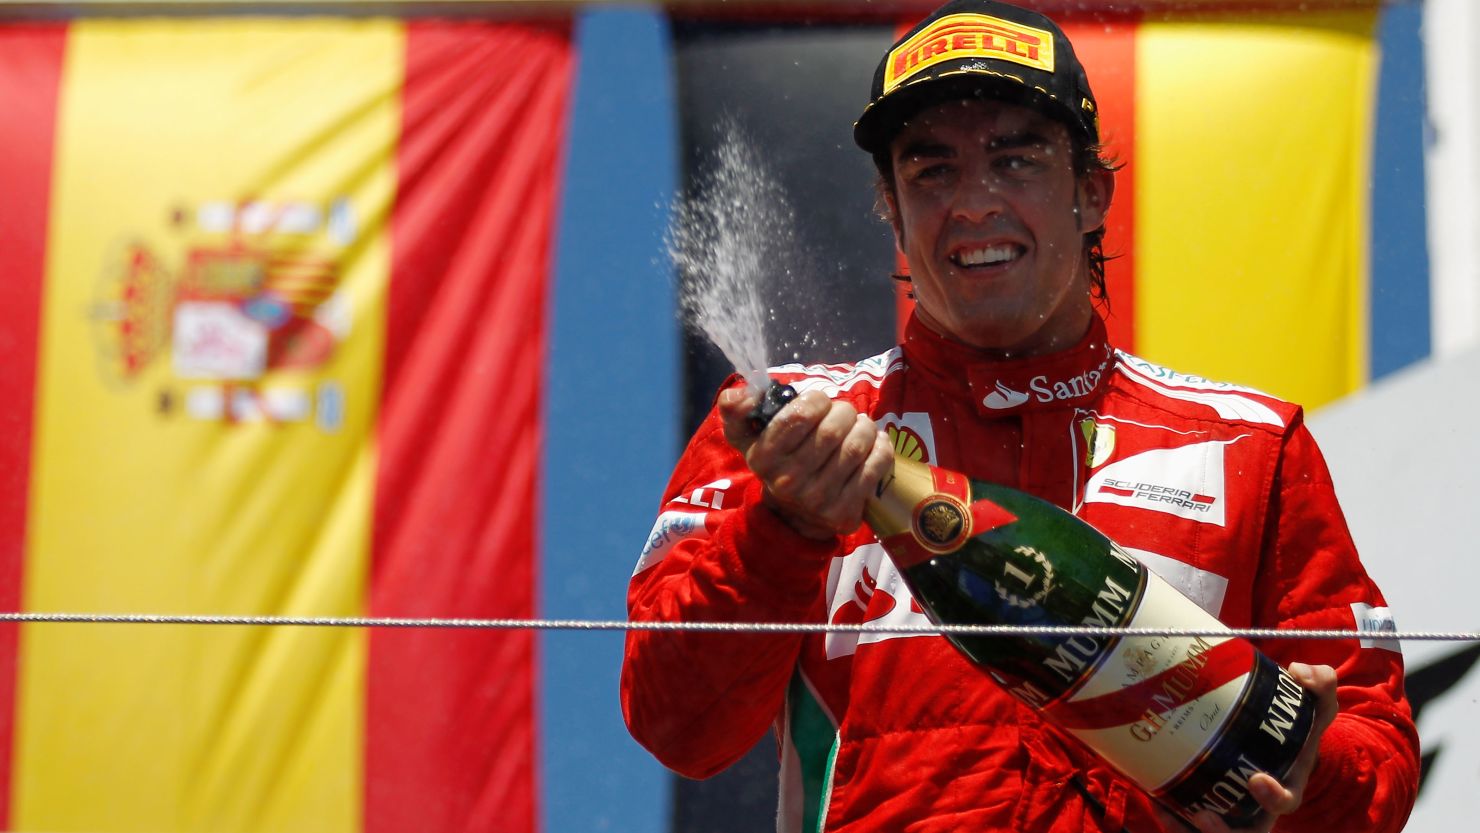 Fernando Alonso celebrates his famous victory in the European Grand Prix in Valencia in front of his Spanish fans.